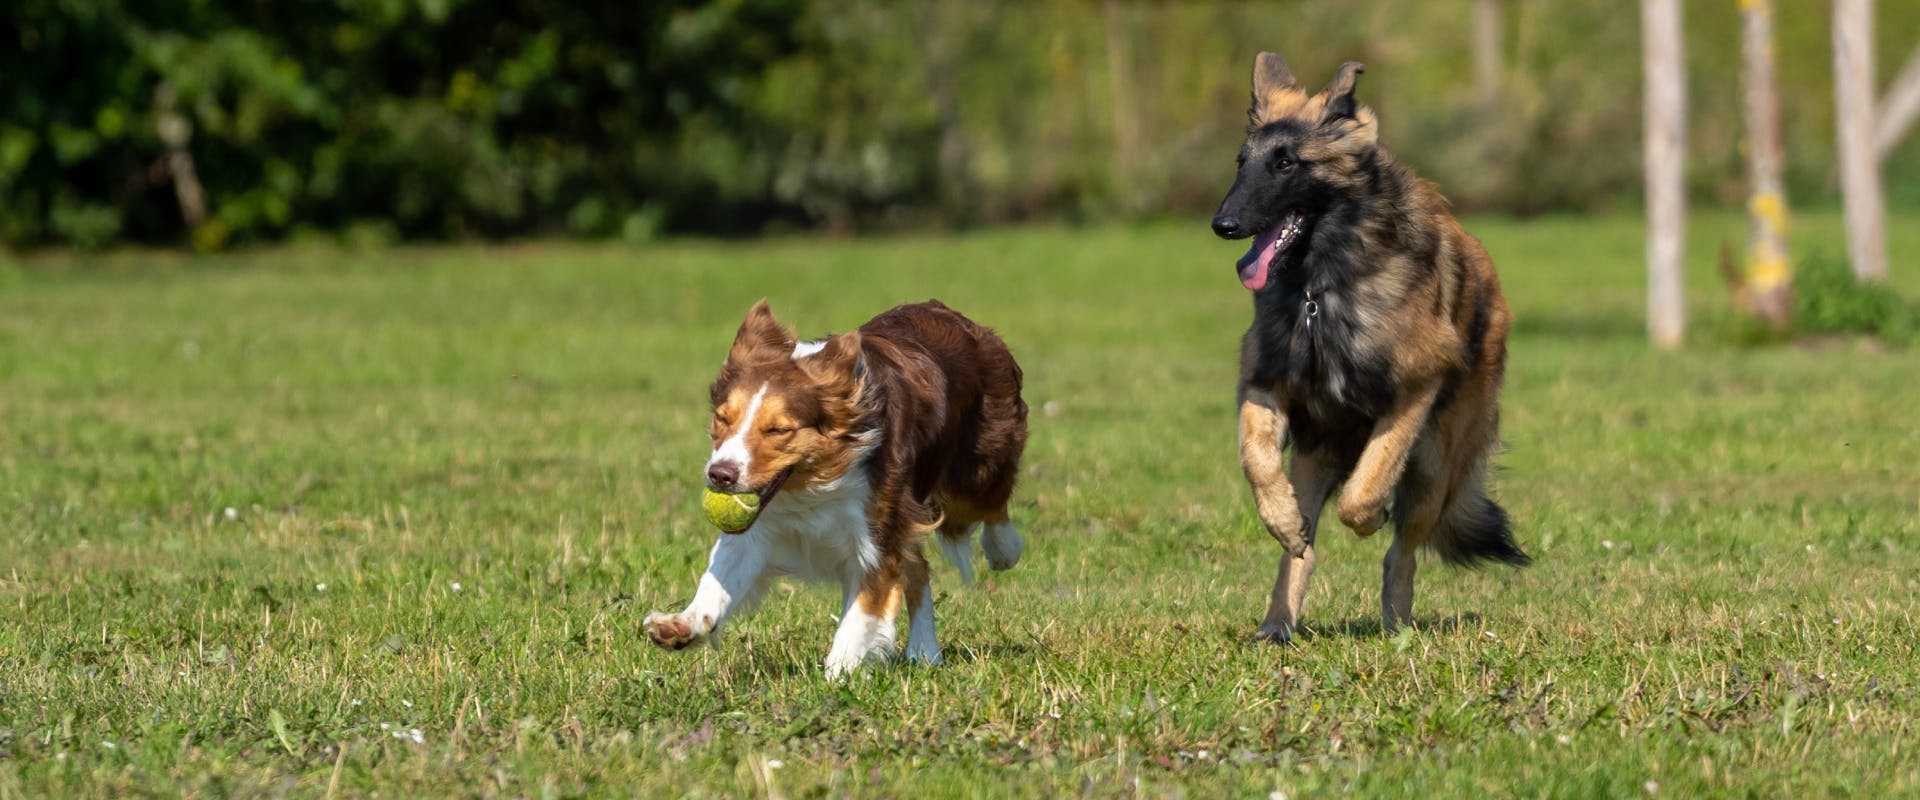 A dog chases after a dog with a tennis ball. 